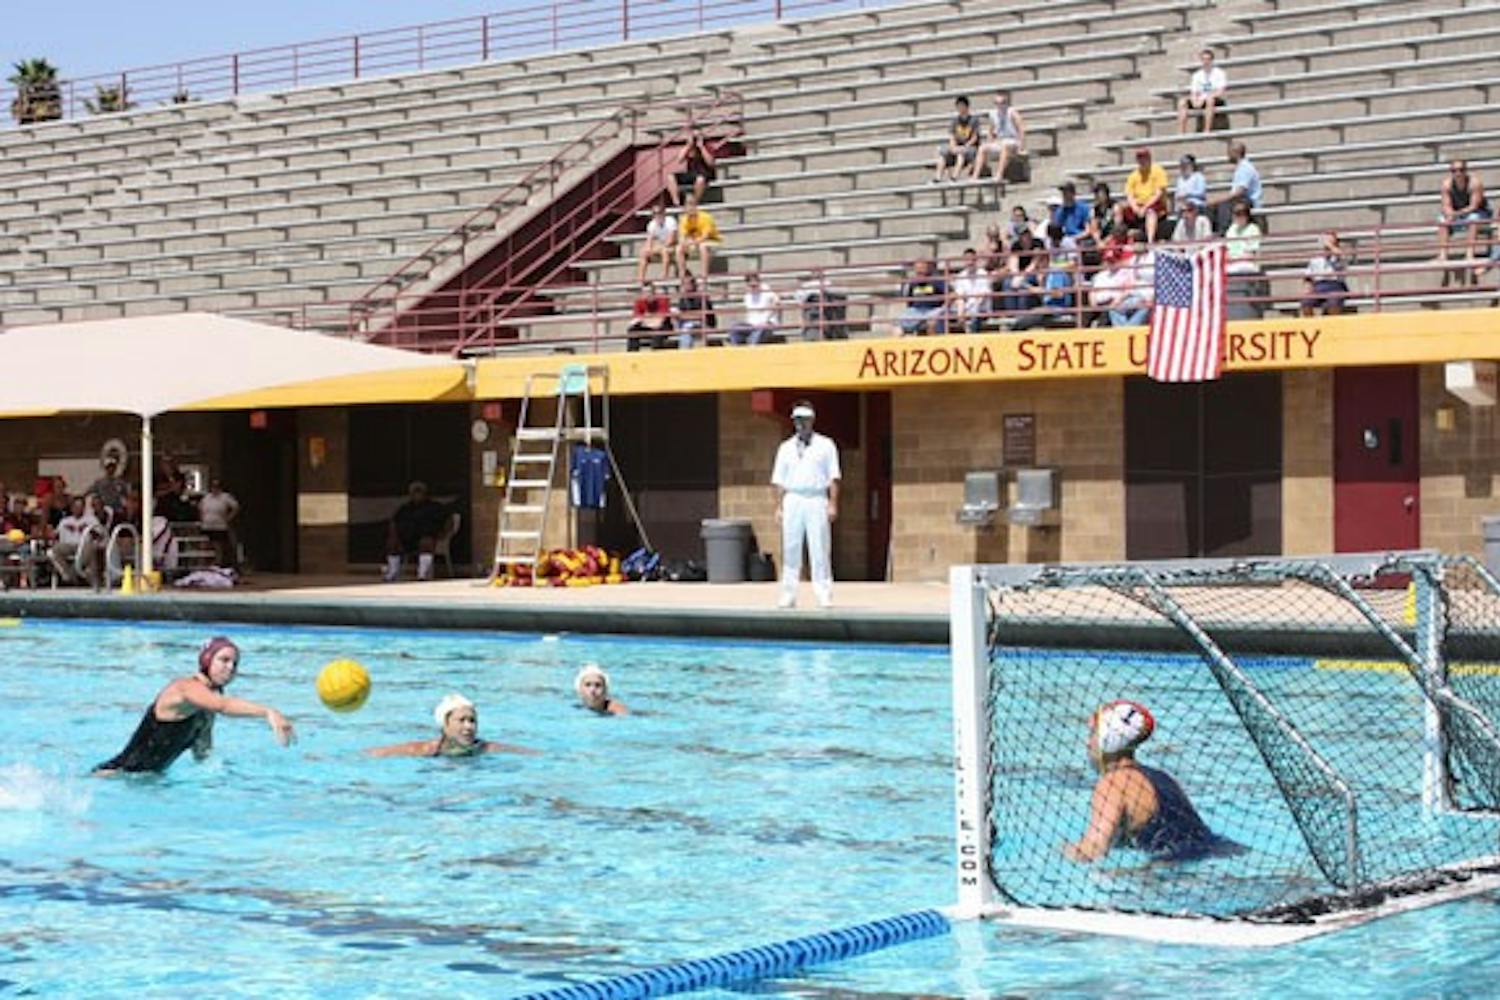 ON TARGET: ASU junior attacker Sarah Harris fires a shot during the Sun Devils’ 14-11 loss to No. 3 California on Saturday at the Mona Plummer Aquatic Center. (Photo by Jessica Weisel)